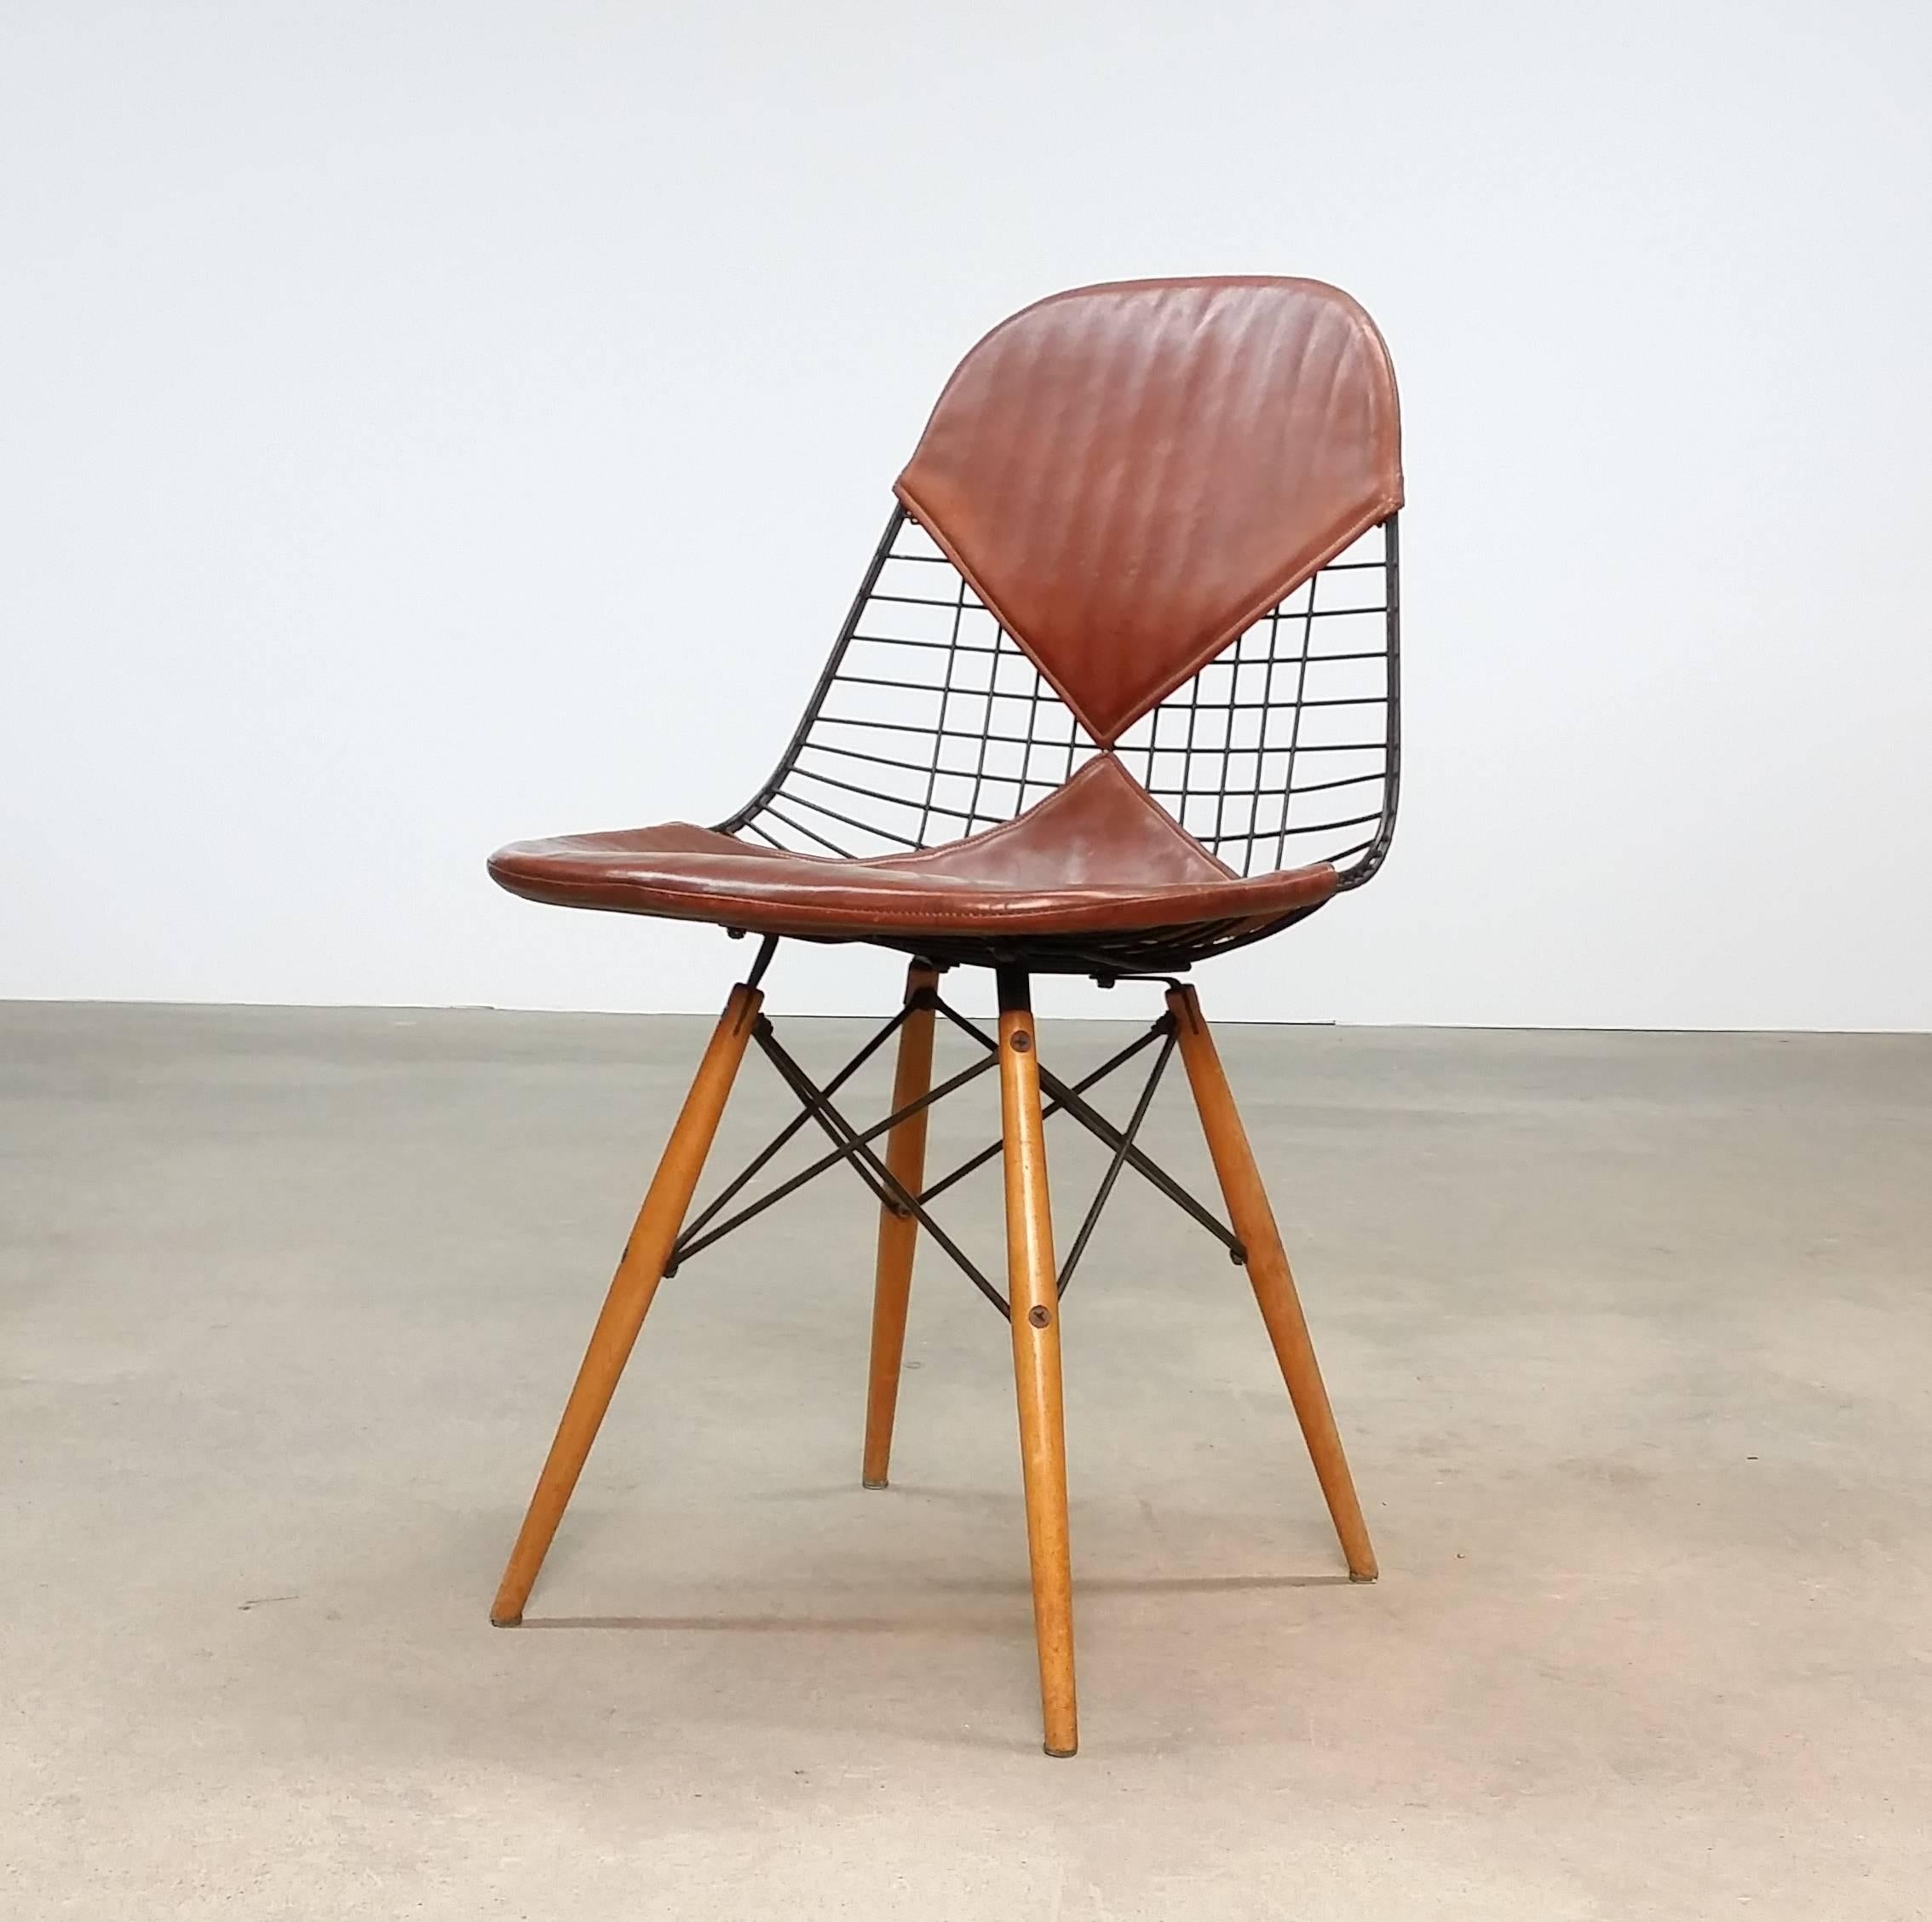 Early DKW-2 (dining height / wire shell / wood base) with leather bikini cover, designed by Ray & Charles Eames, circa 1950. This example produced by Herman Miller, circa 1952-1954. Retains the 901 West Washington Blvd, Venice California tag.